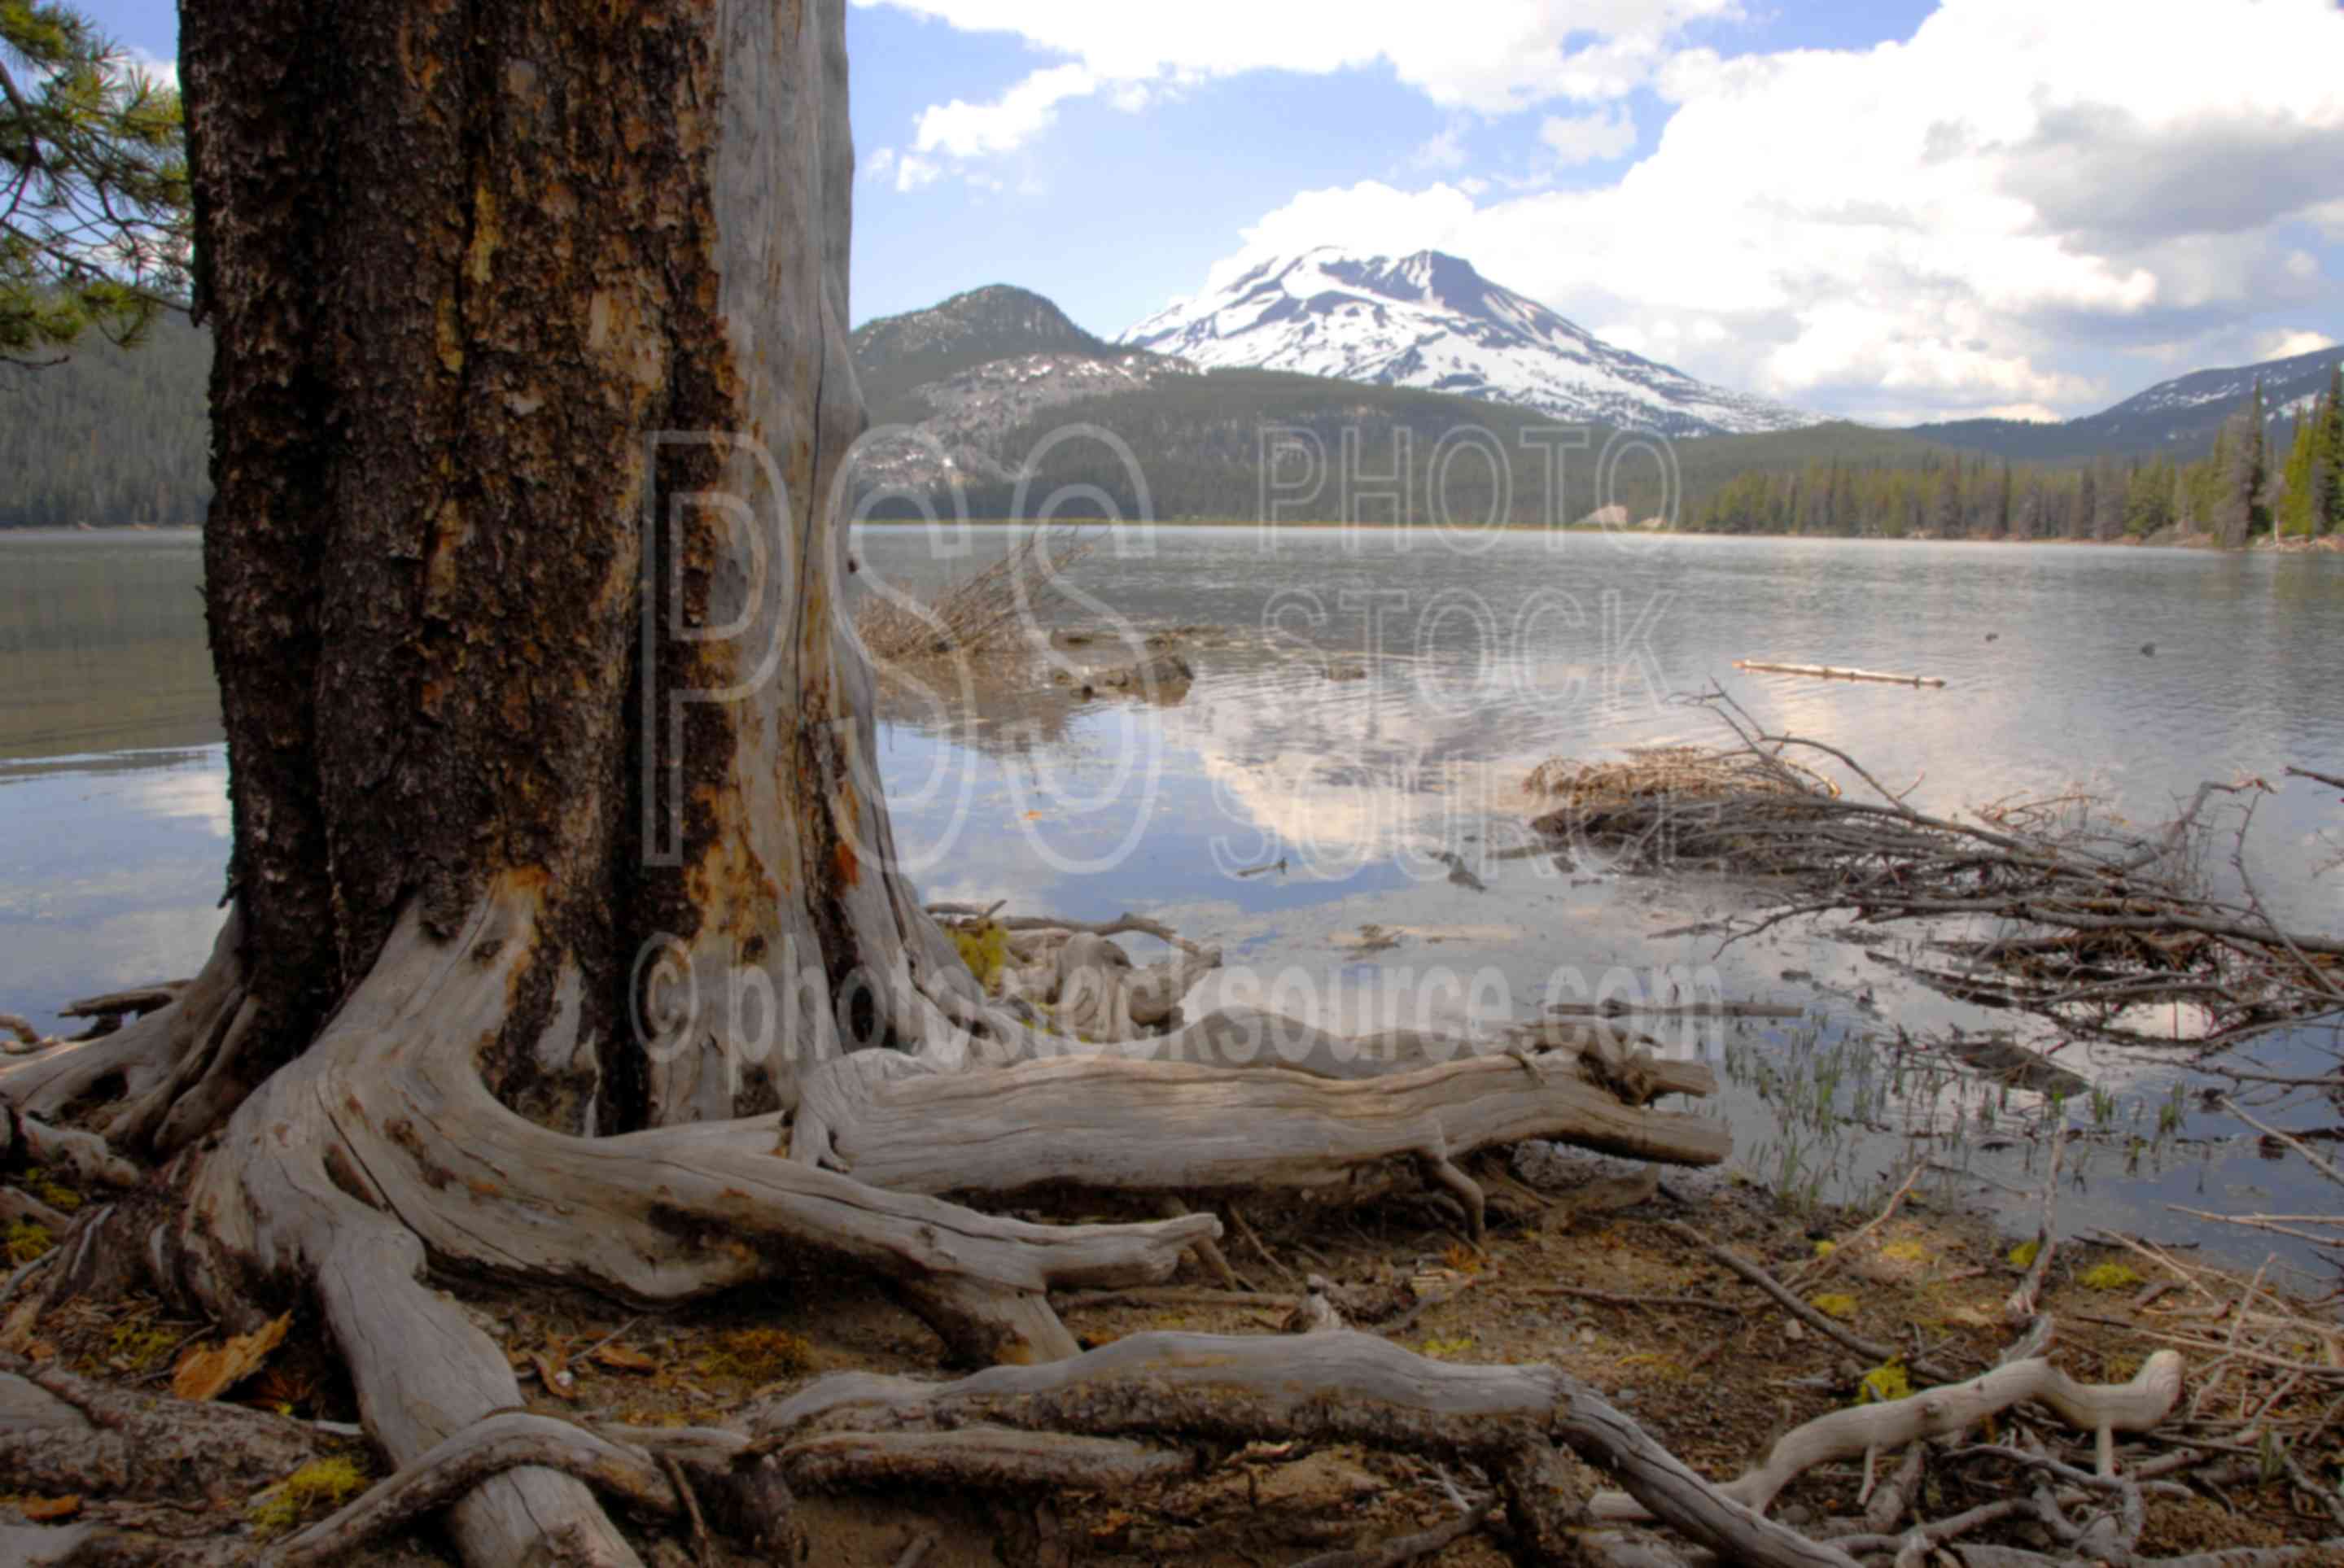 South Sister,three sisters,three sisters wilderness,wilderness,snow,sparks lake,lake,tree,tree roots,lakes rivers,mountains